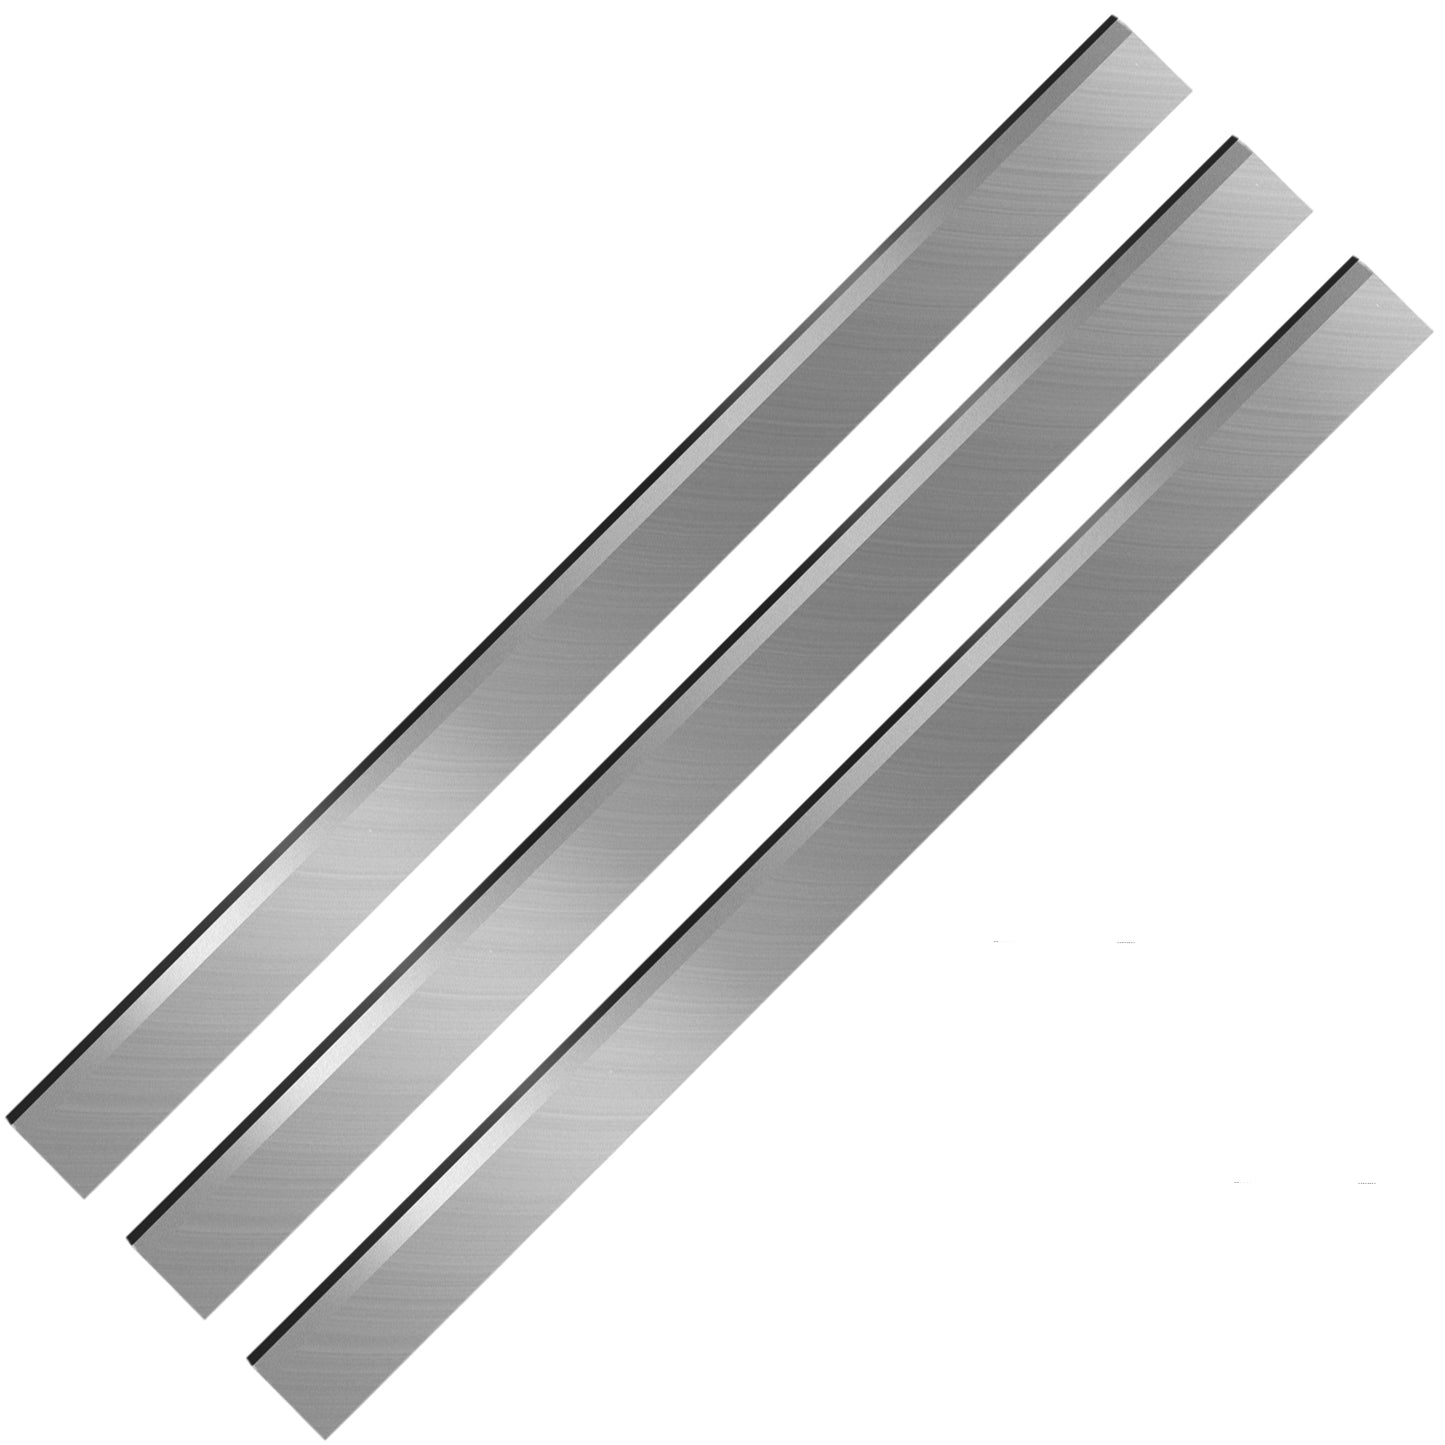 11" Inch TCT HSS Planer Industrial Replacement Knives Resharpenable Cutters Jointer Blades Power Tool Parts for Woodworking Thickness Planer, 3Pcs, 280x20x3mm